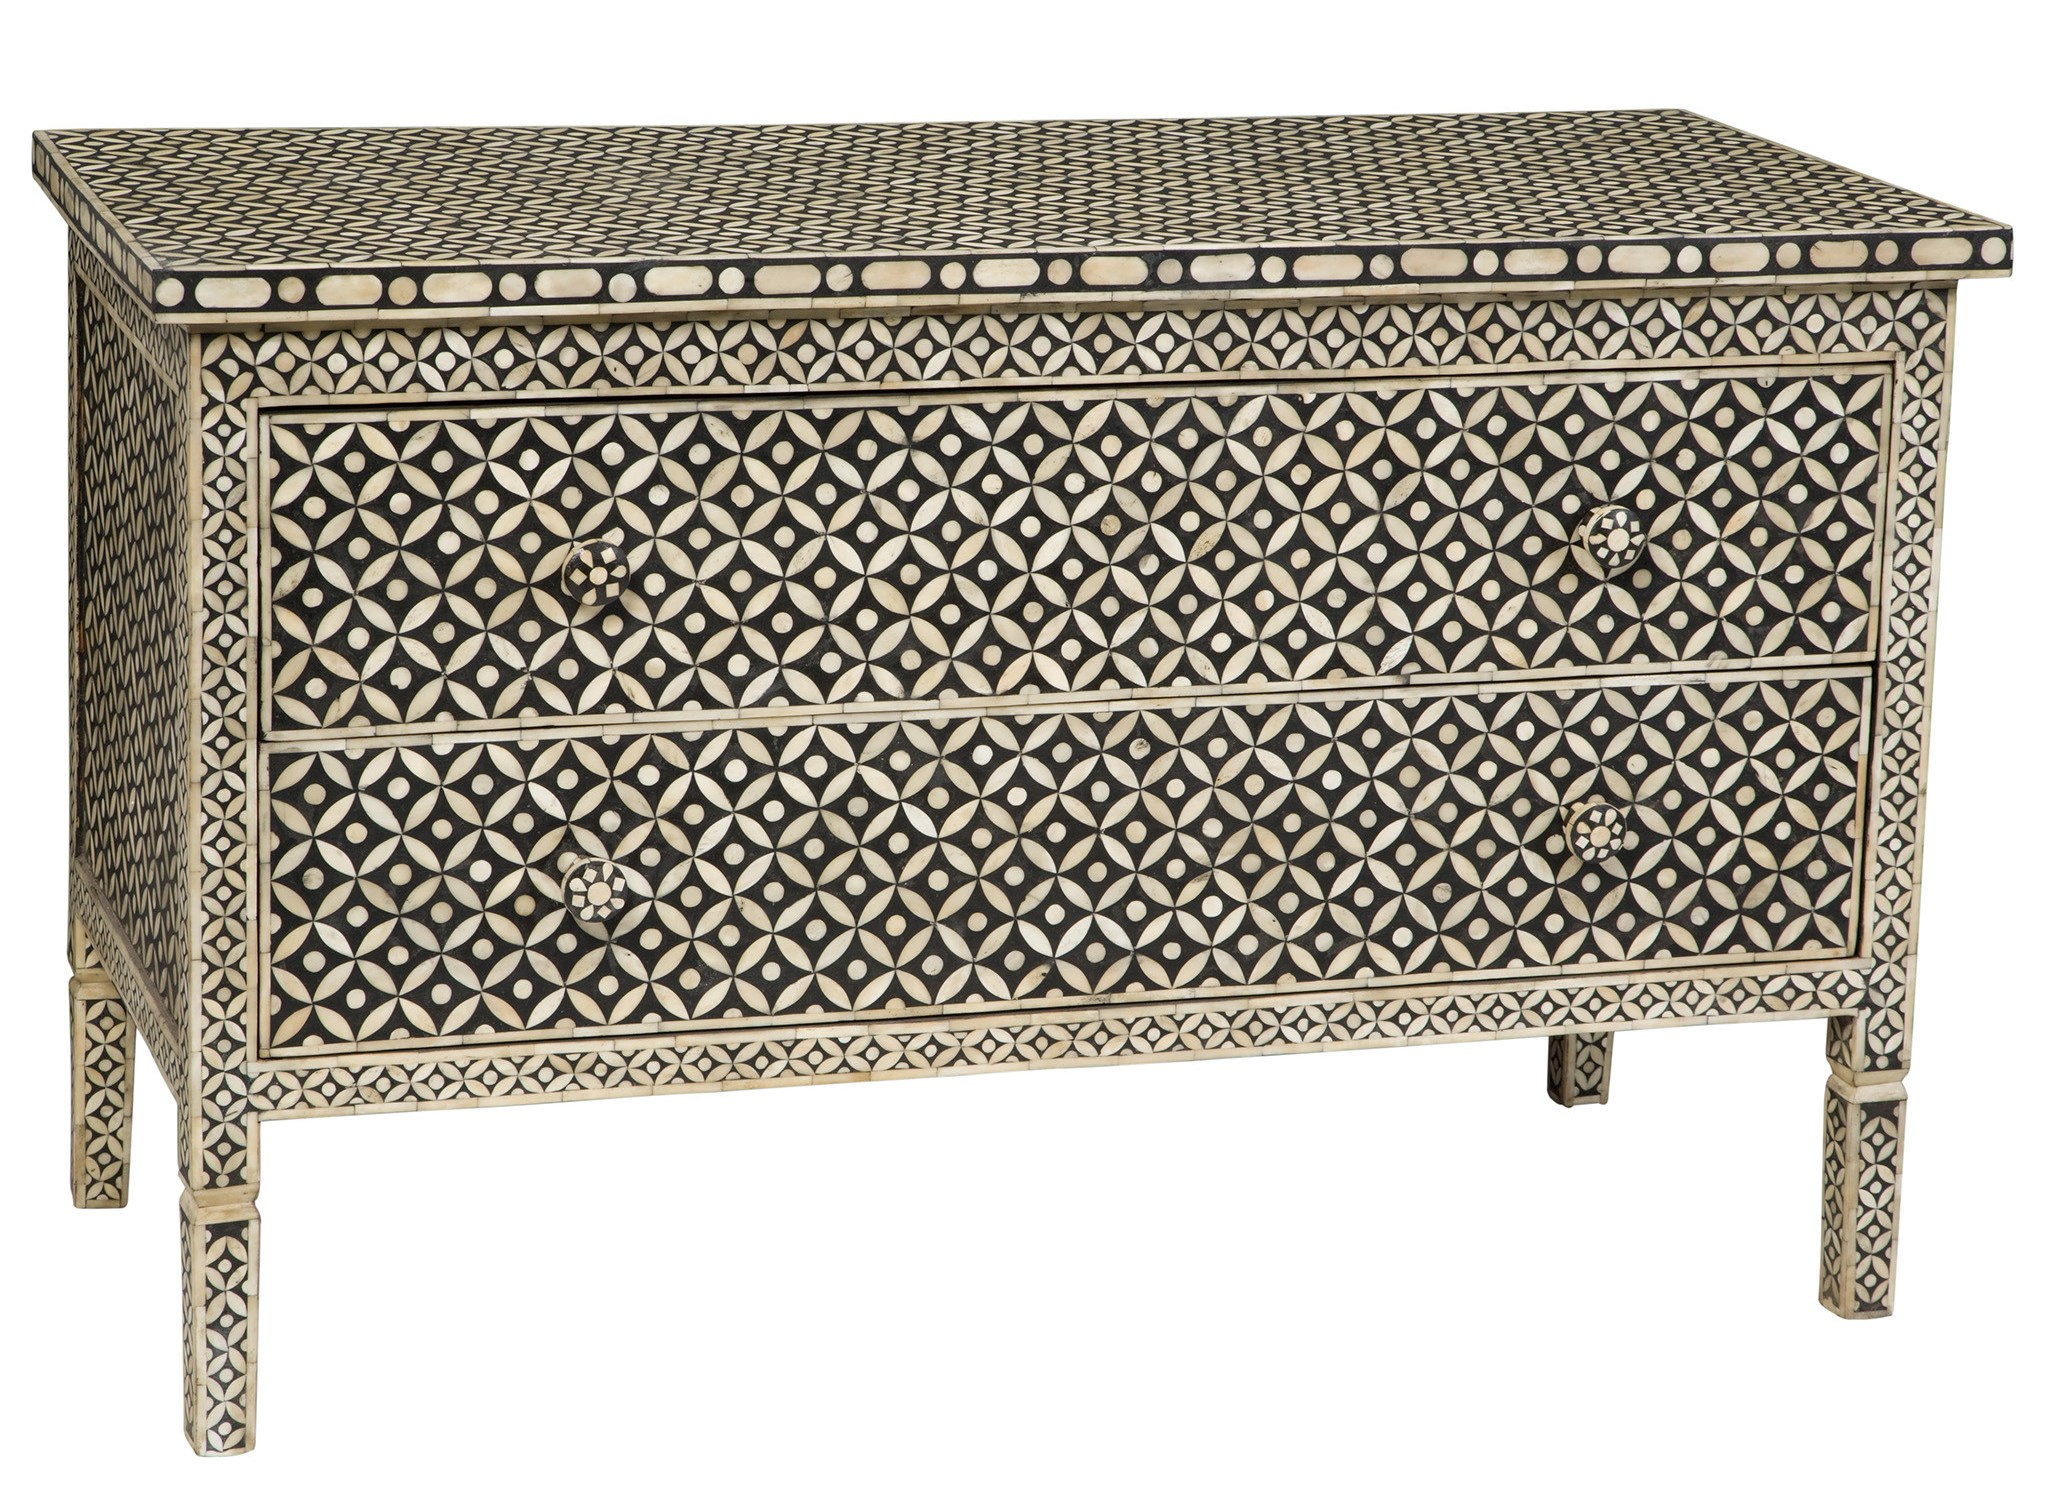 Bone Inlay 2 Drawer Chest Large Geometric Design in Grey Color ...